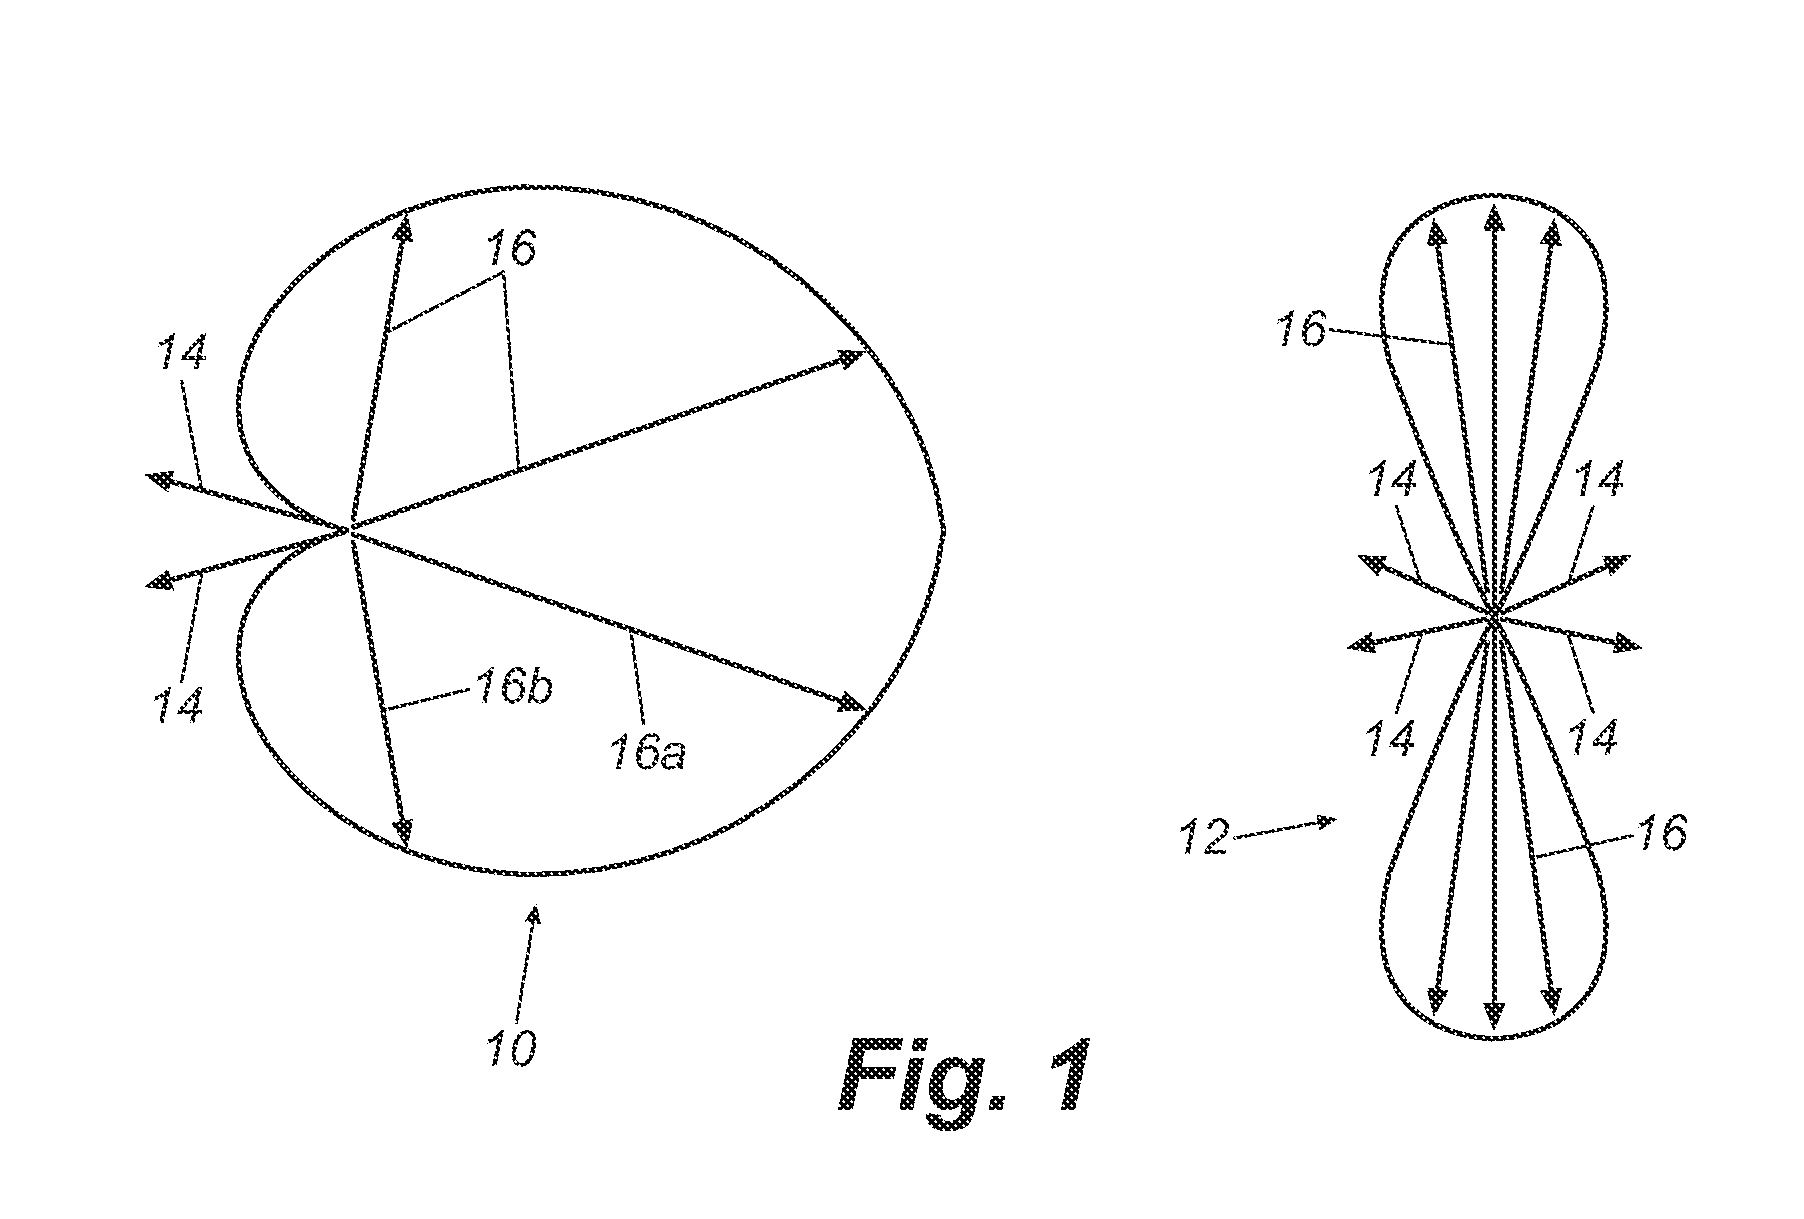 System and method for directionally radiating sound